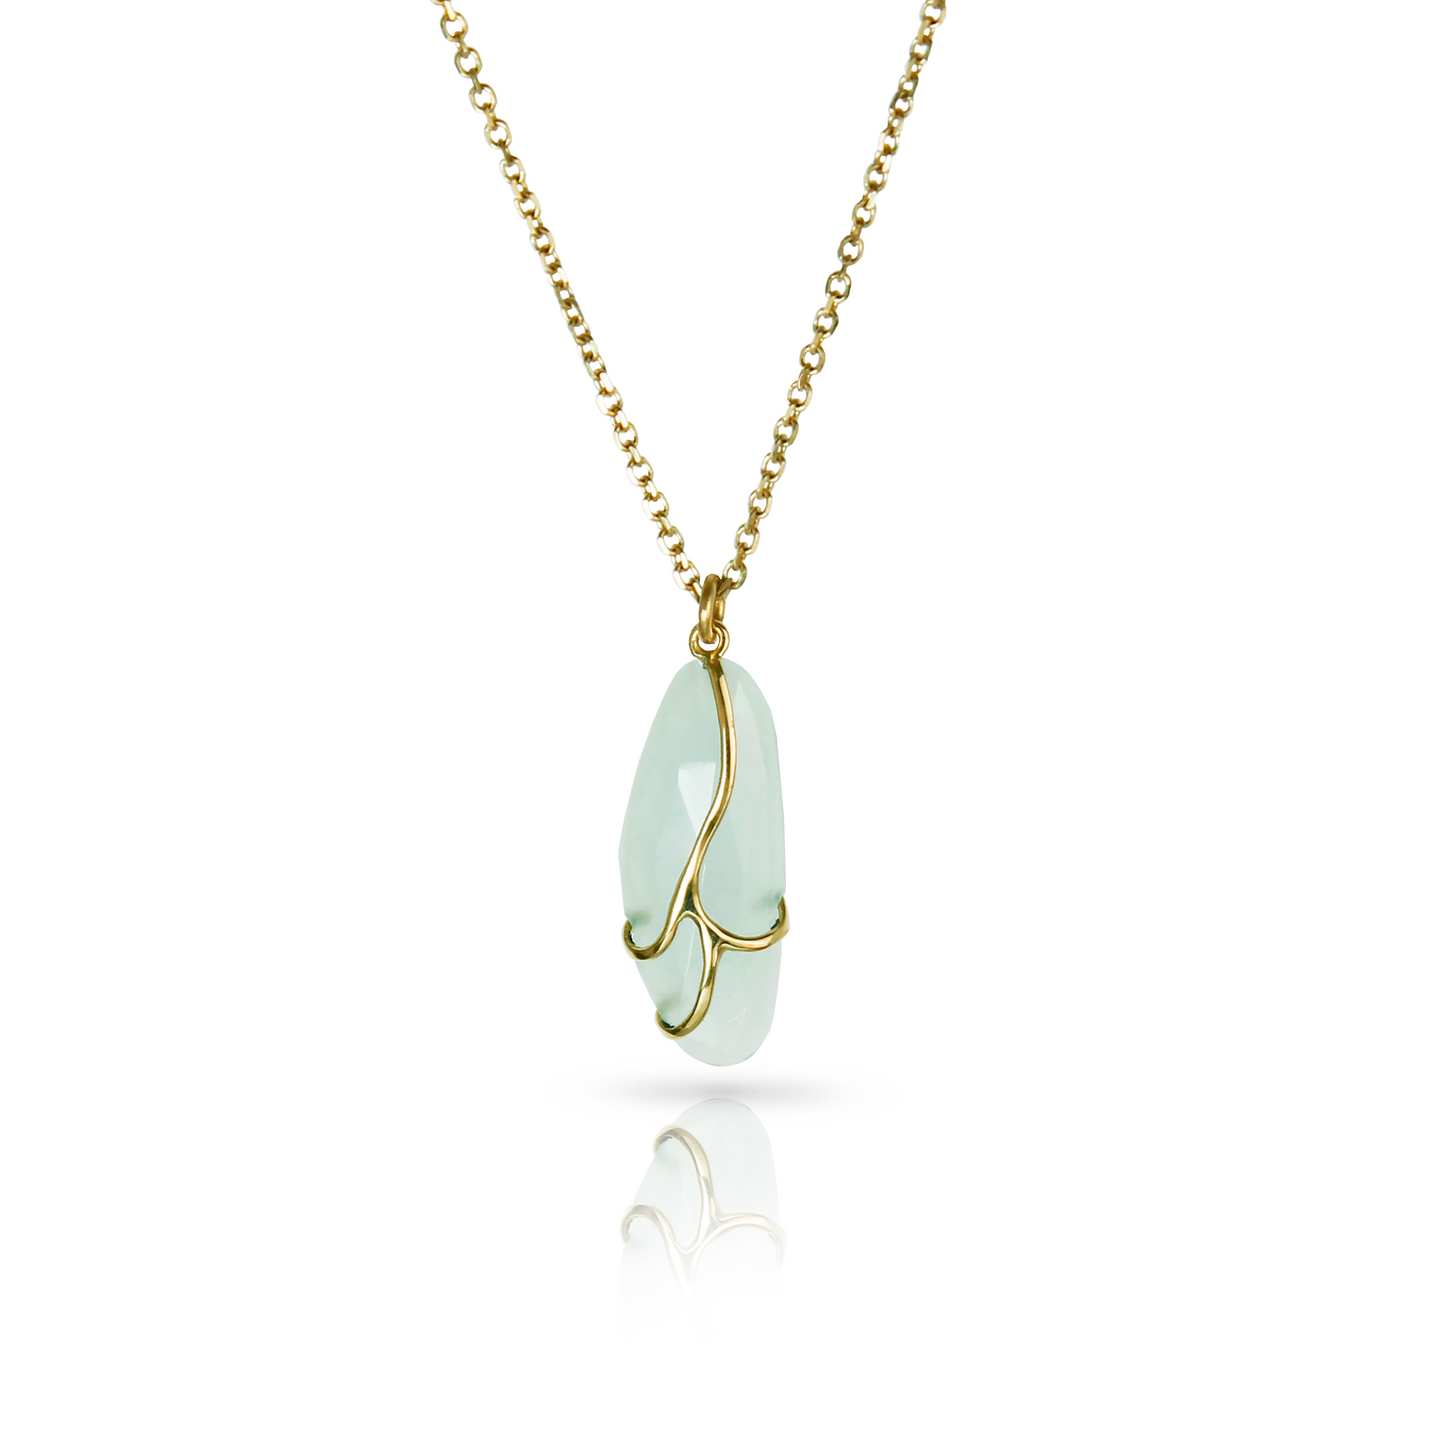 Necklace with pale blue, skinny amorphous shaped aquamarine stone, with yellow gold butterfly wing detail and gold chain